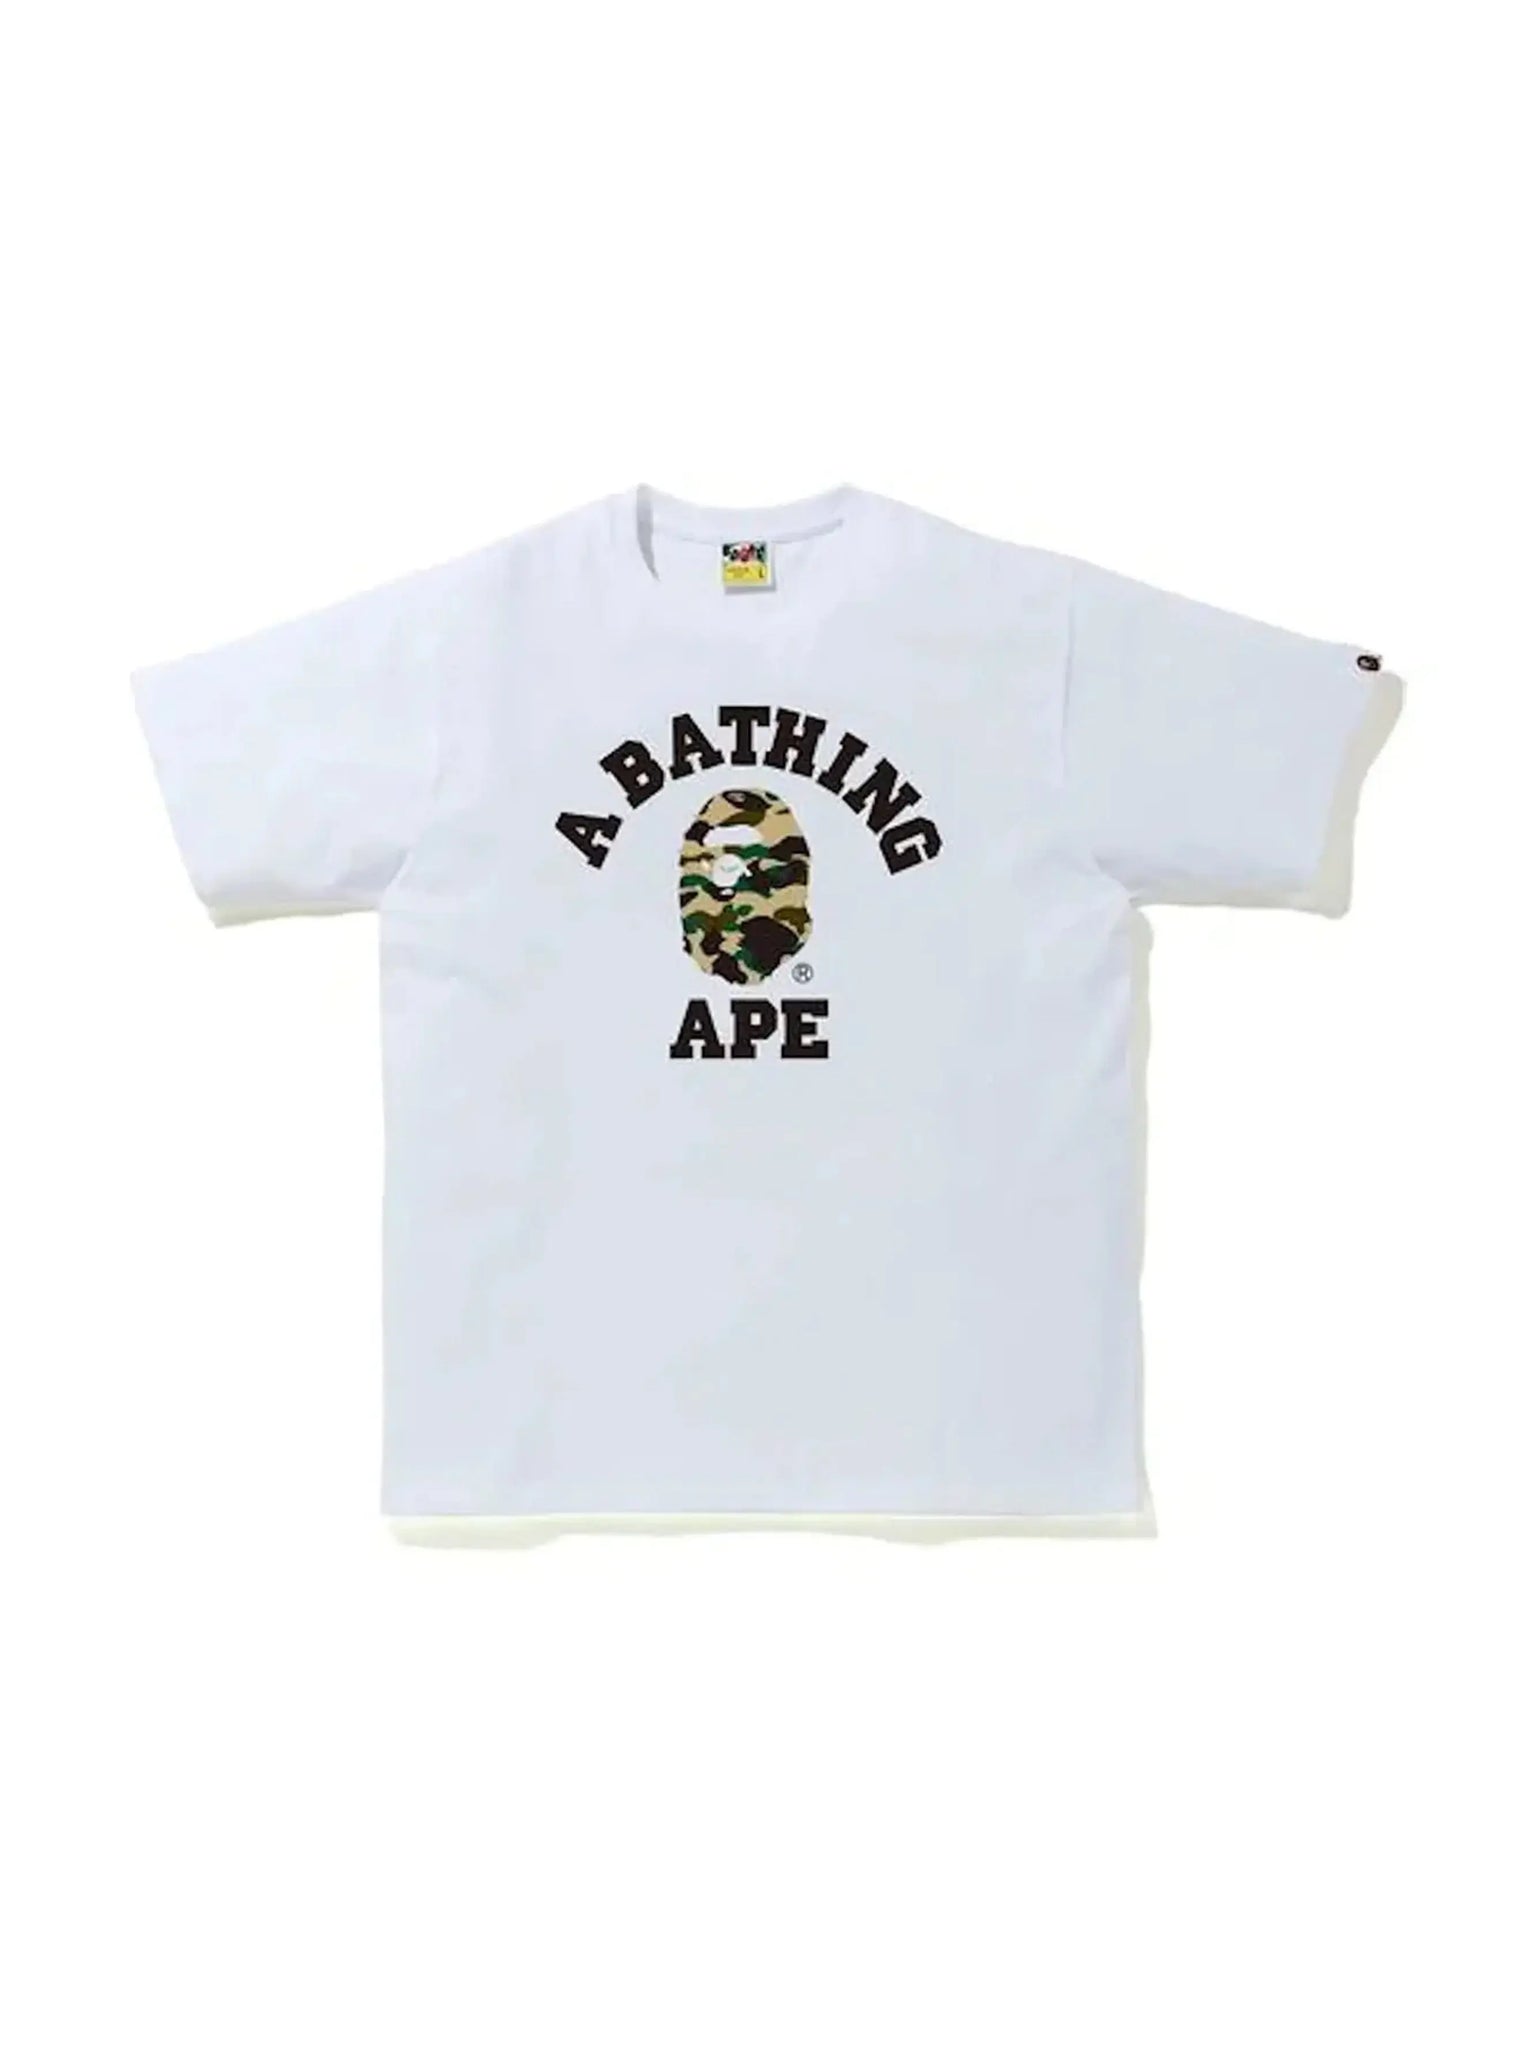 BAPE 1st Camo College T-Shirt White/Yellow in Auckland, New Zealand - Shop name